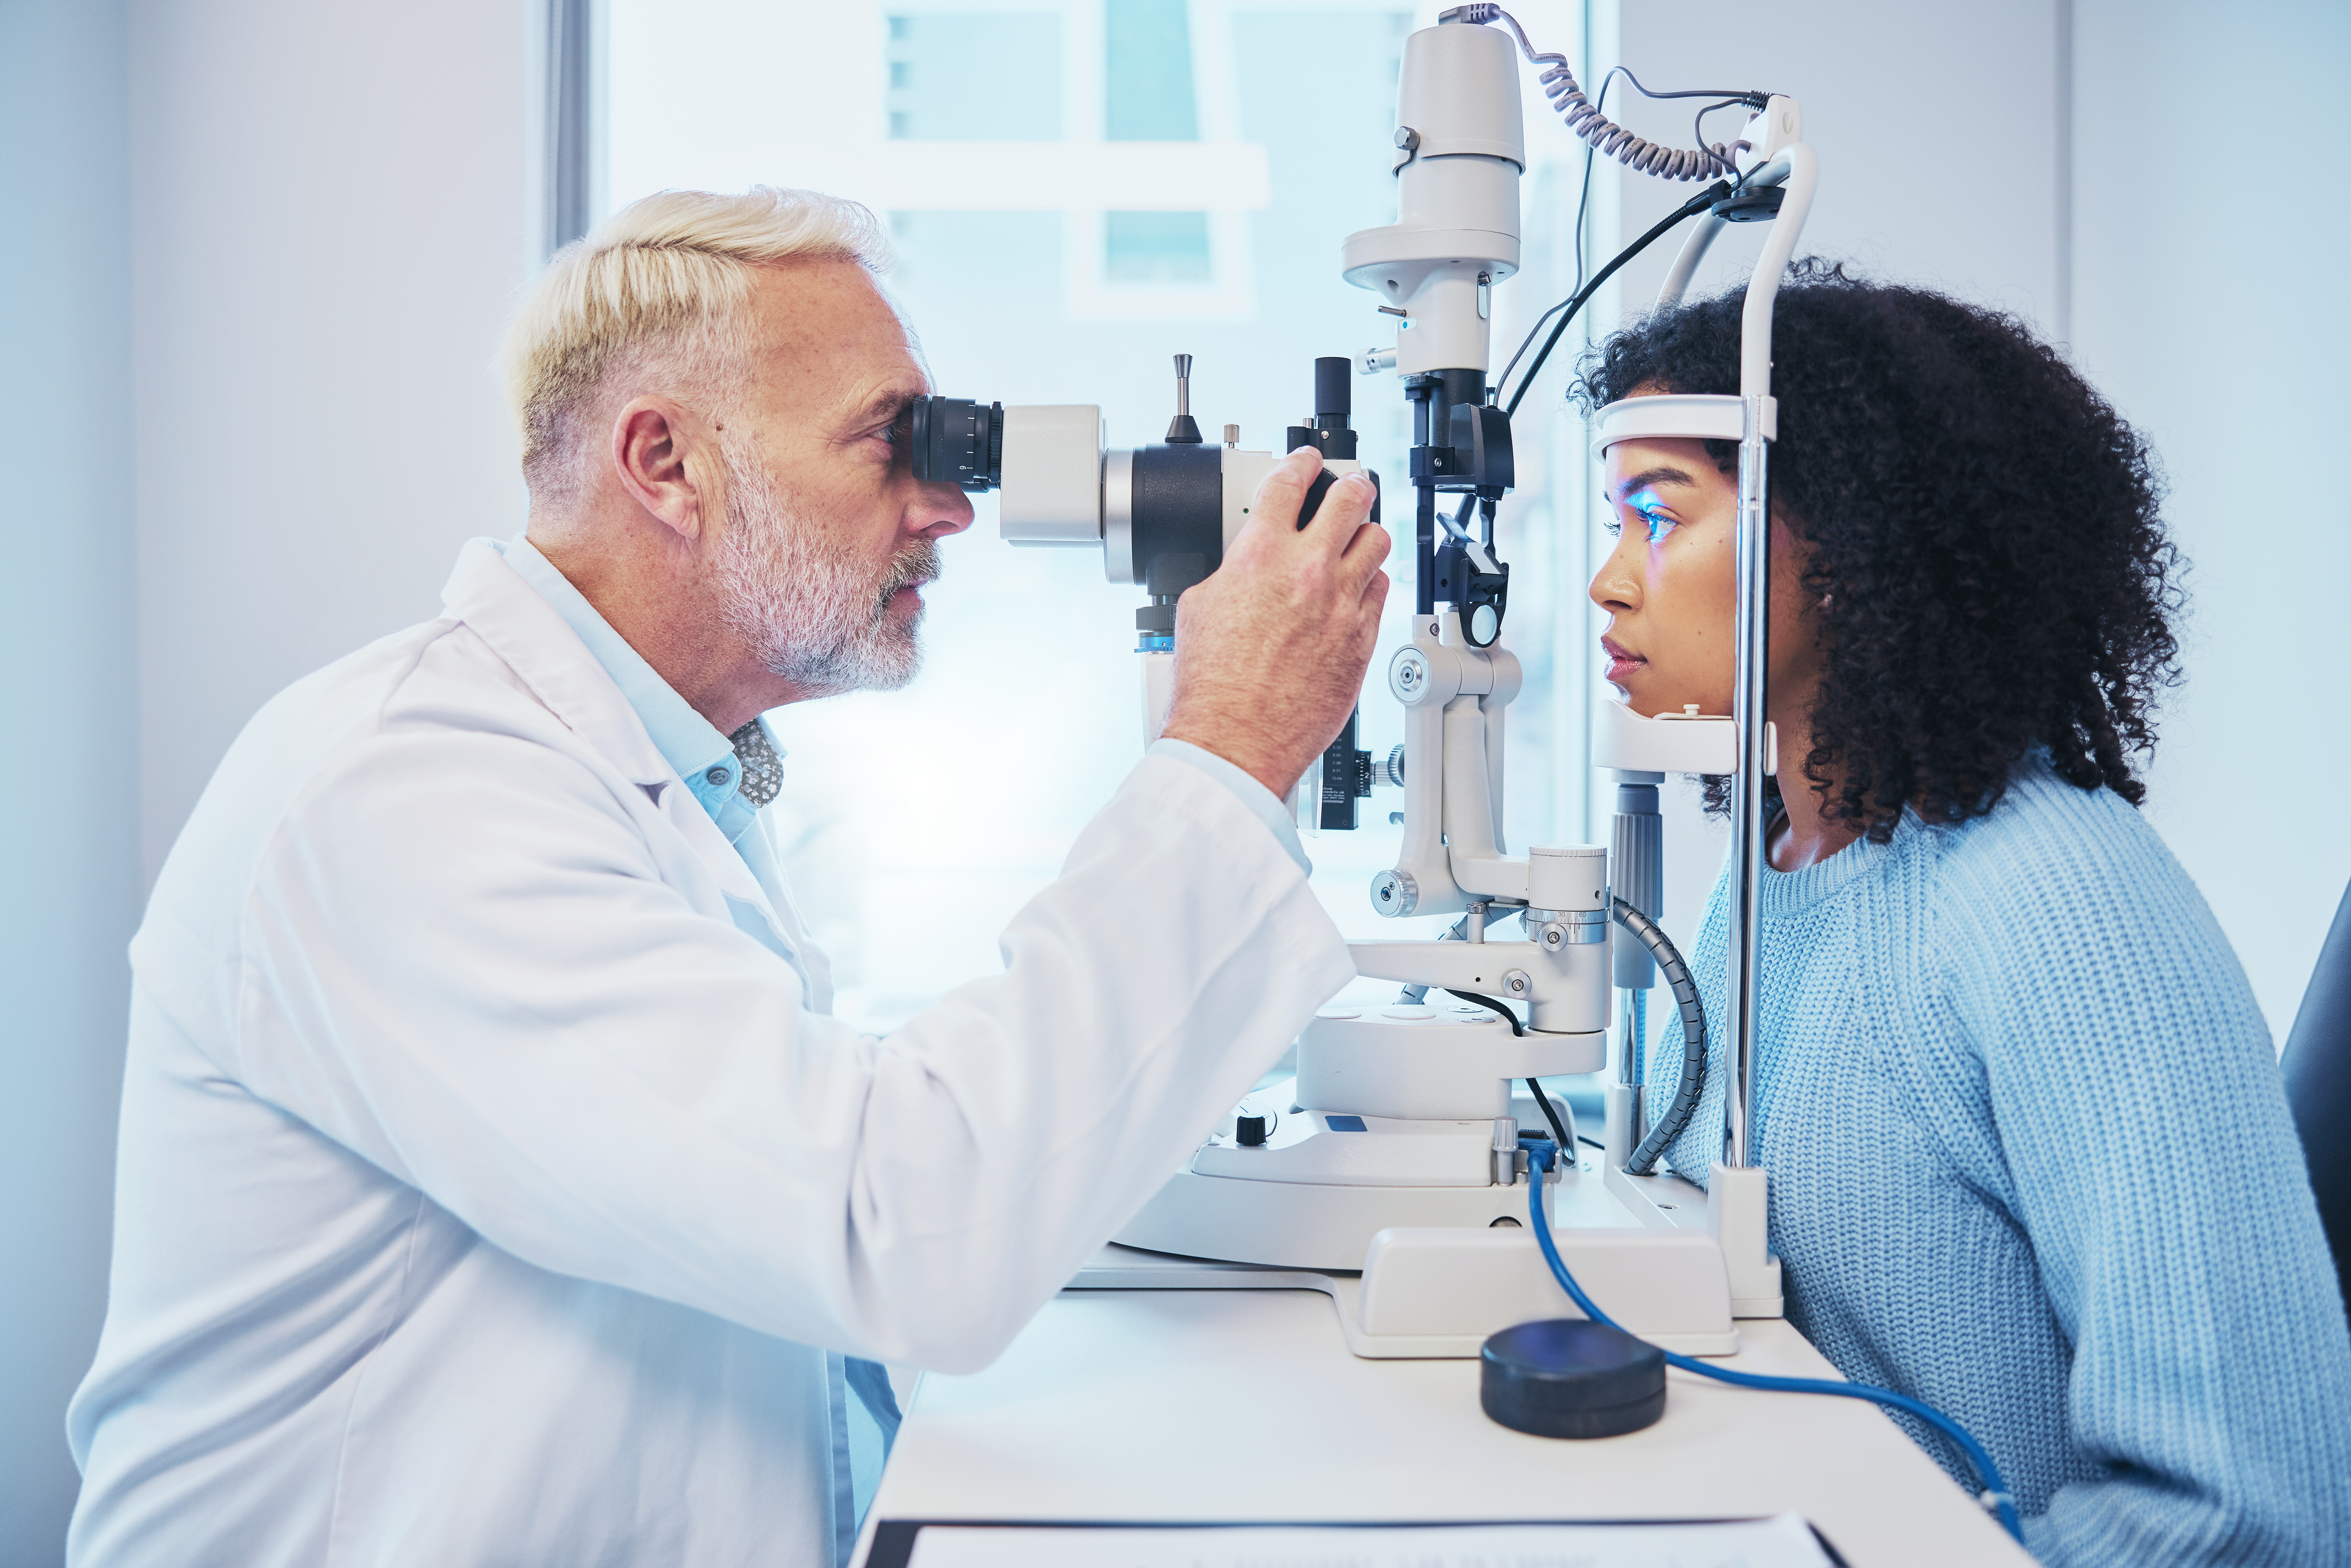 Glaucoma management in the era of artificial intelligence